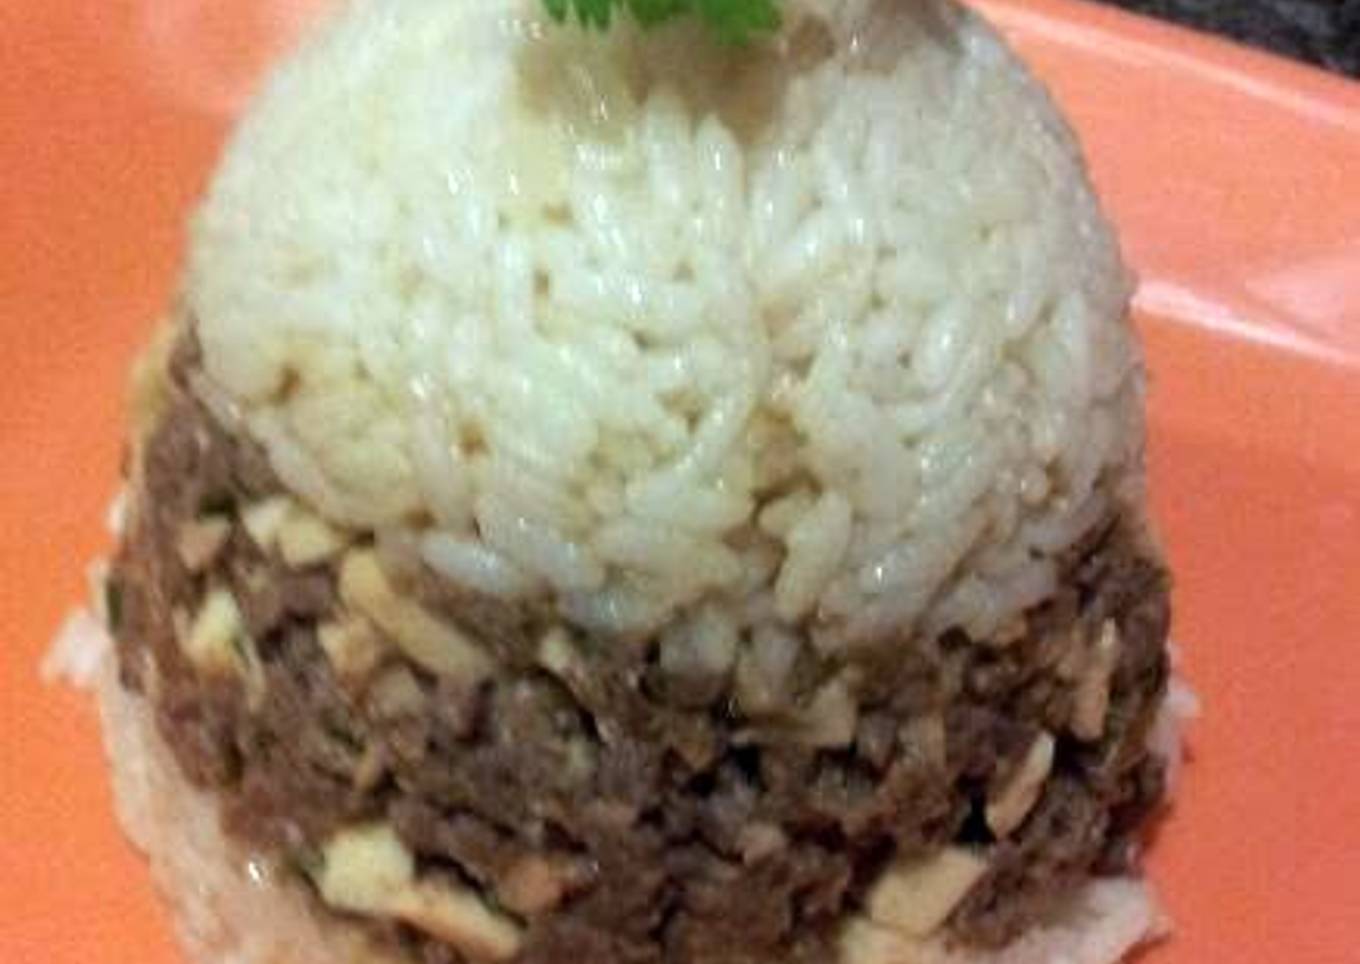 Arroz Tapado con Carne
"Covered Ground Beef and Rice"